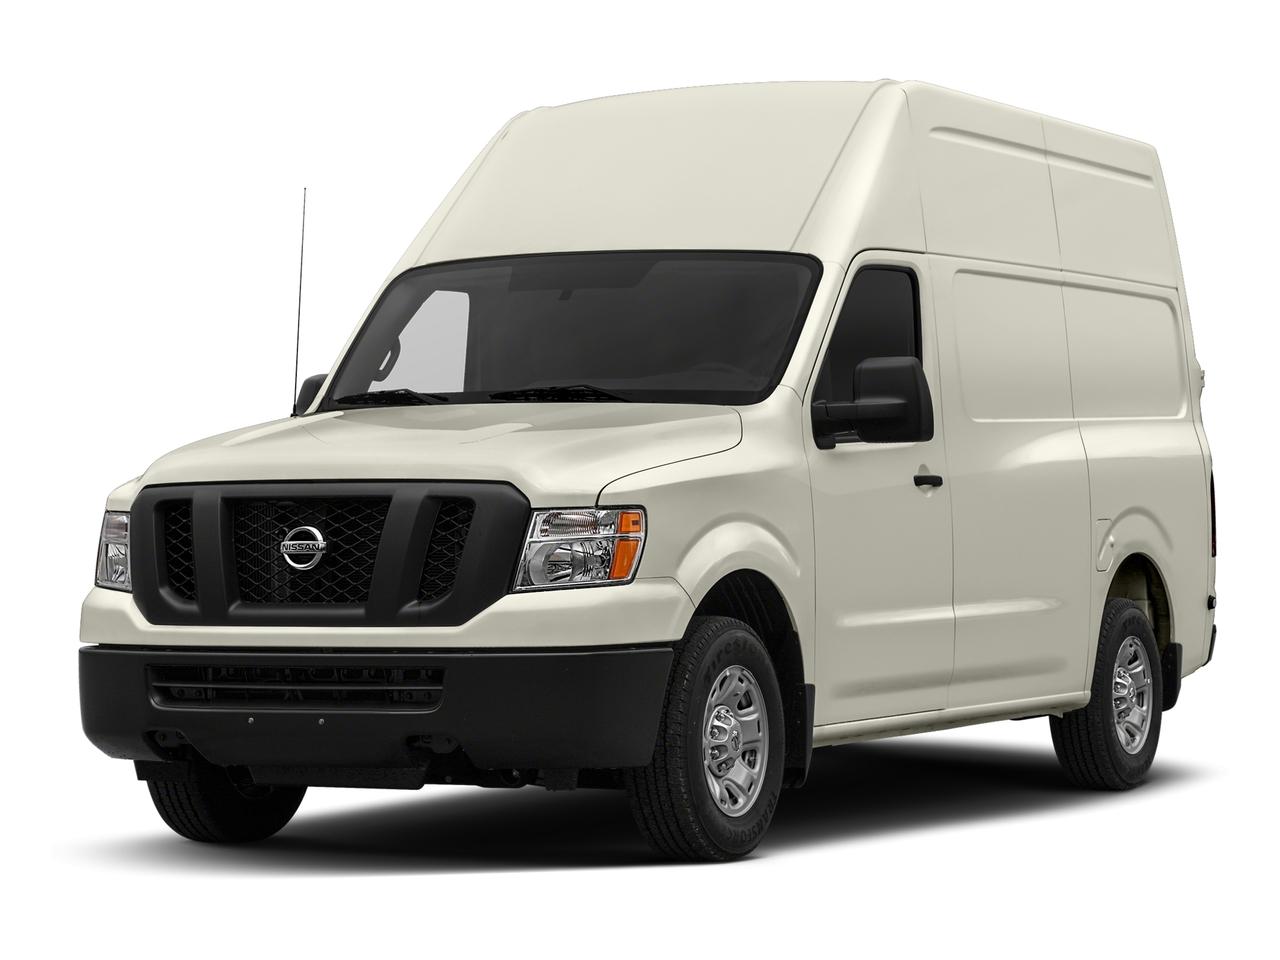 2017 Nissan NV Cargo Vehicle Photo in Cleburne, TX 76033